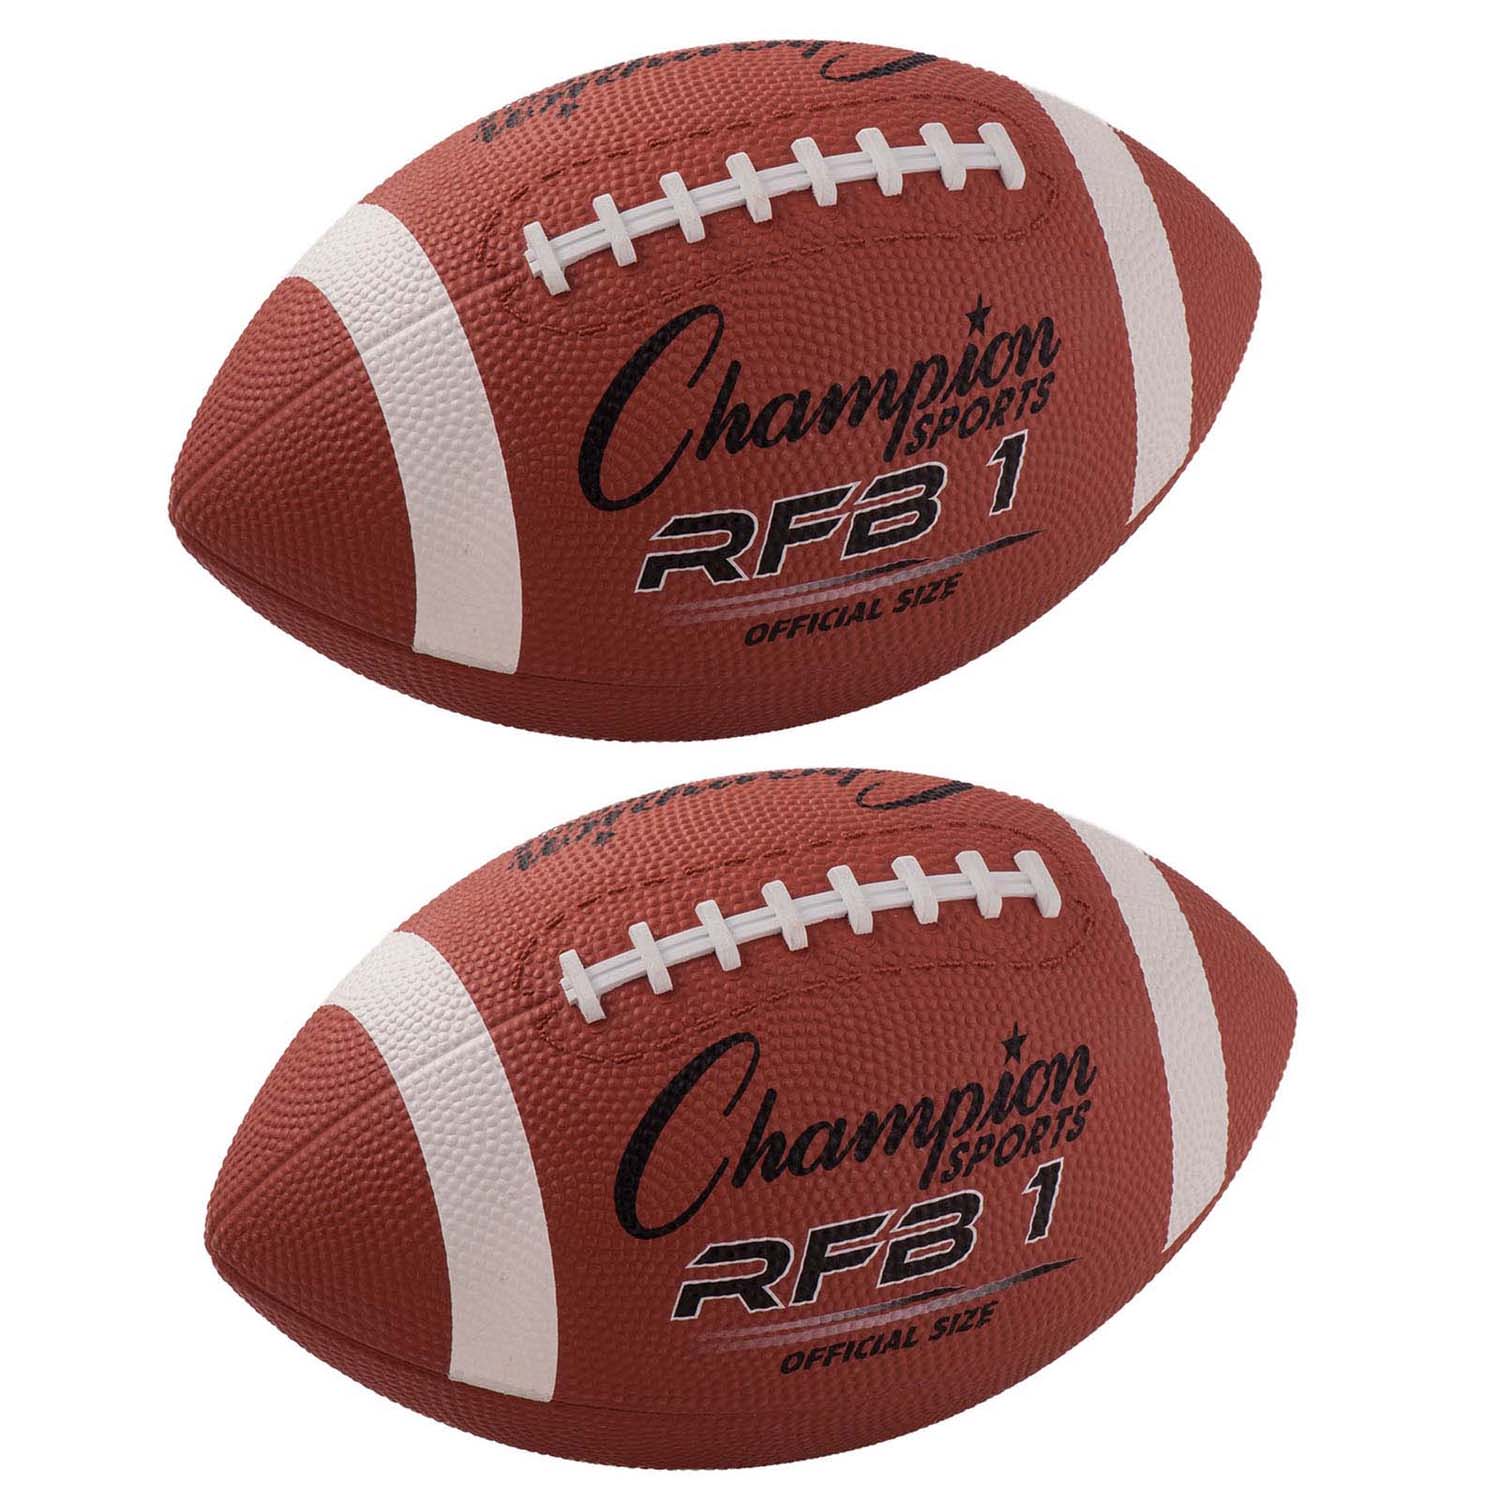 Official Size Rubber Football, Pack of 2